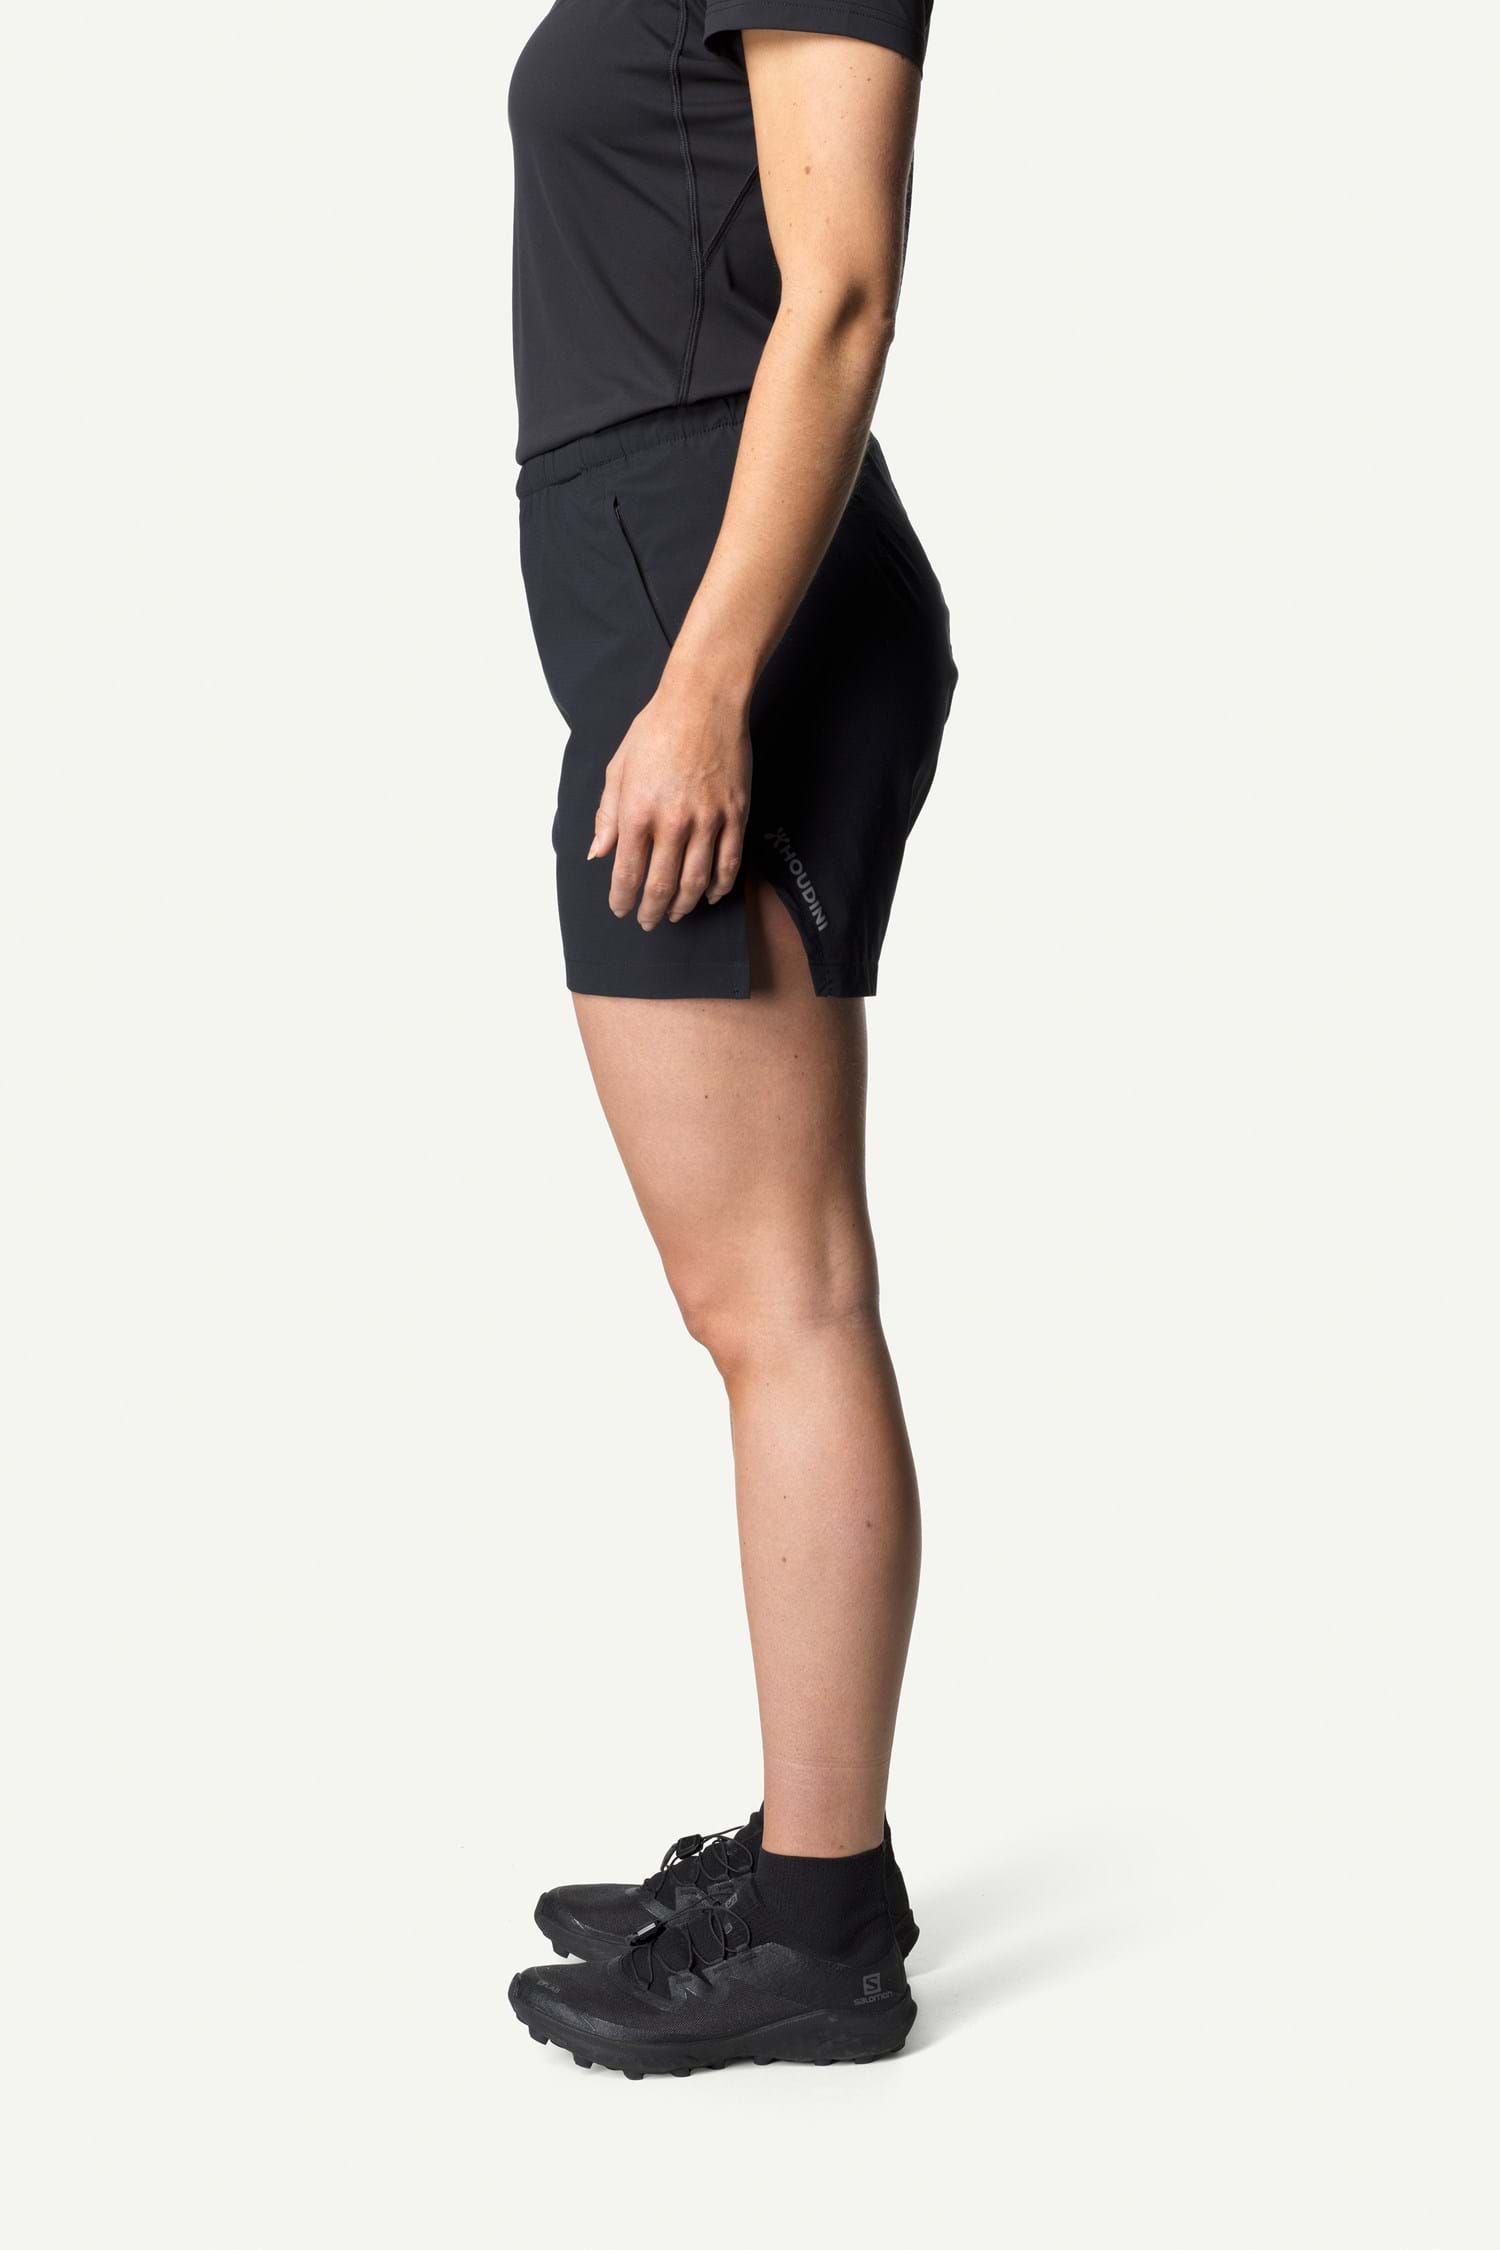 The Only Women's Running Shorts You Need When Warm Weather Hits